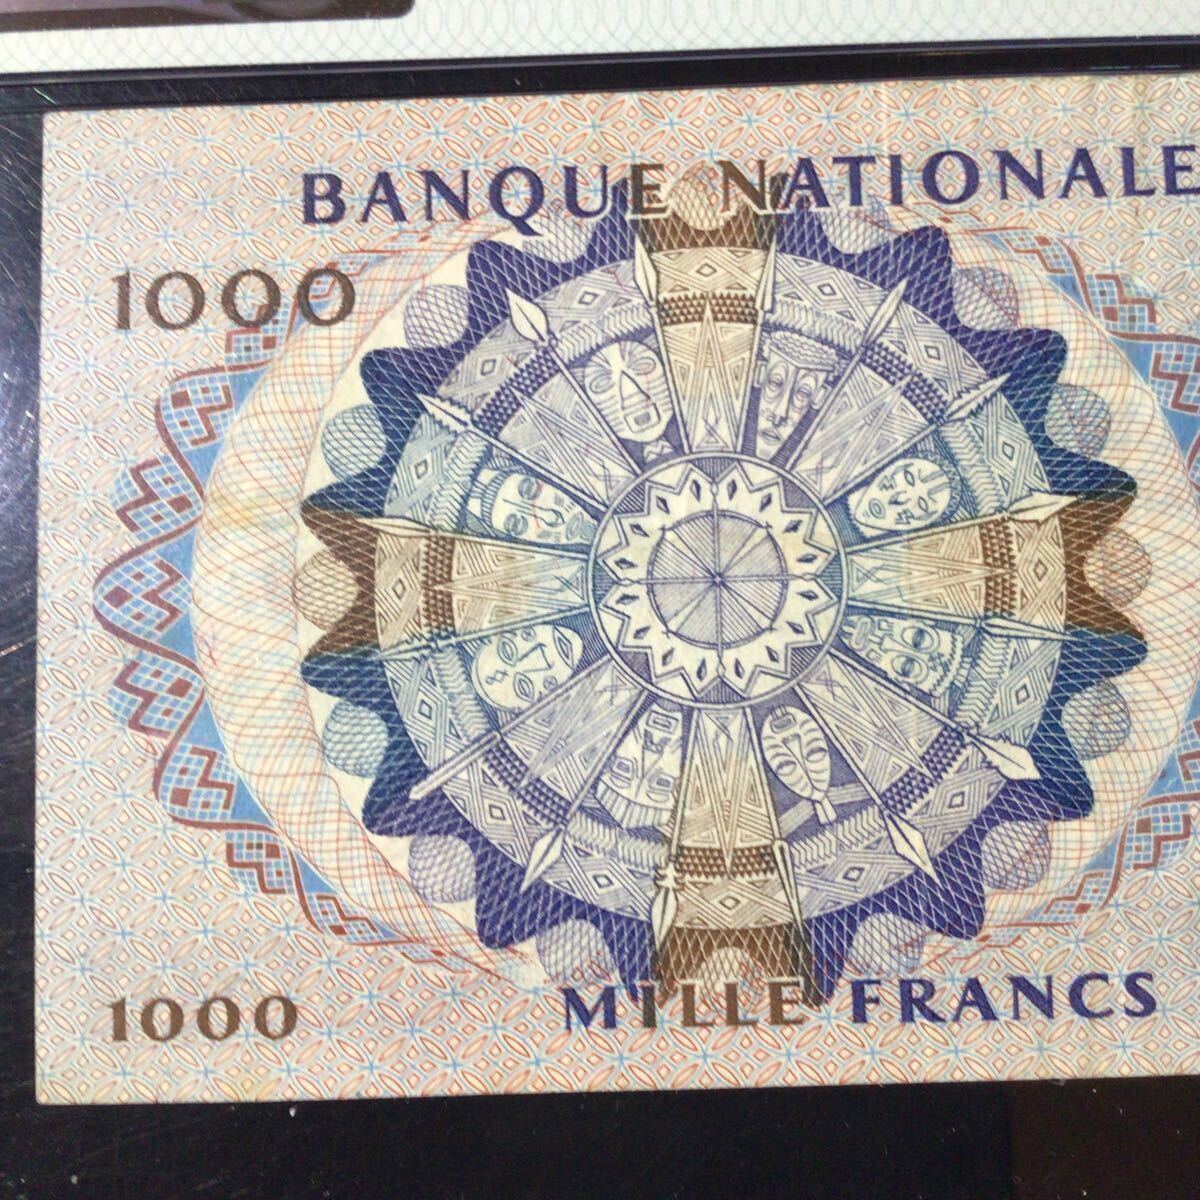 World Banknote Grading KATANGA《Banque Nationale》1000 Francs【1962】『PMG Grading Choice Very Fine 35』_画像6